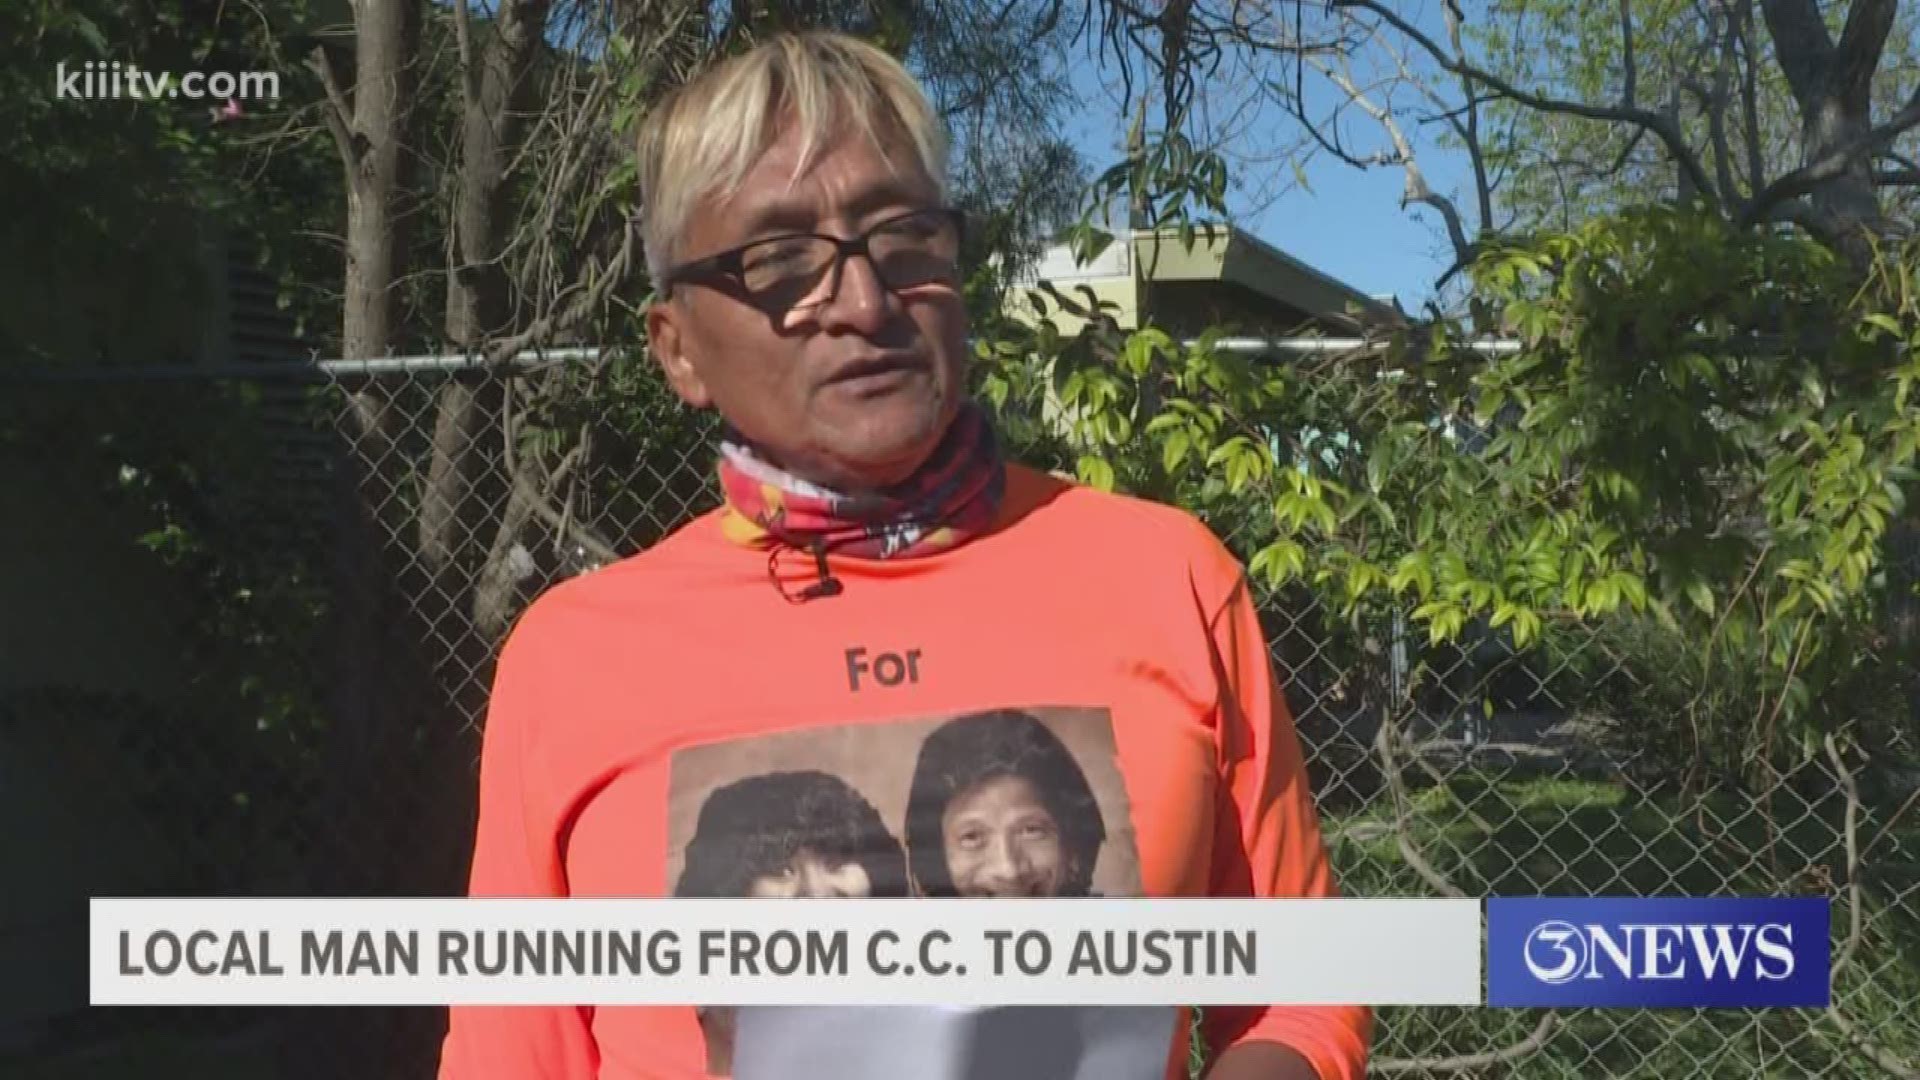 After losing his brother and sister in 2018, the runner has made it his mission to honor their memories by donating money to a foundation in Austin and running a lot